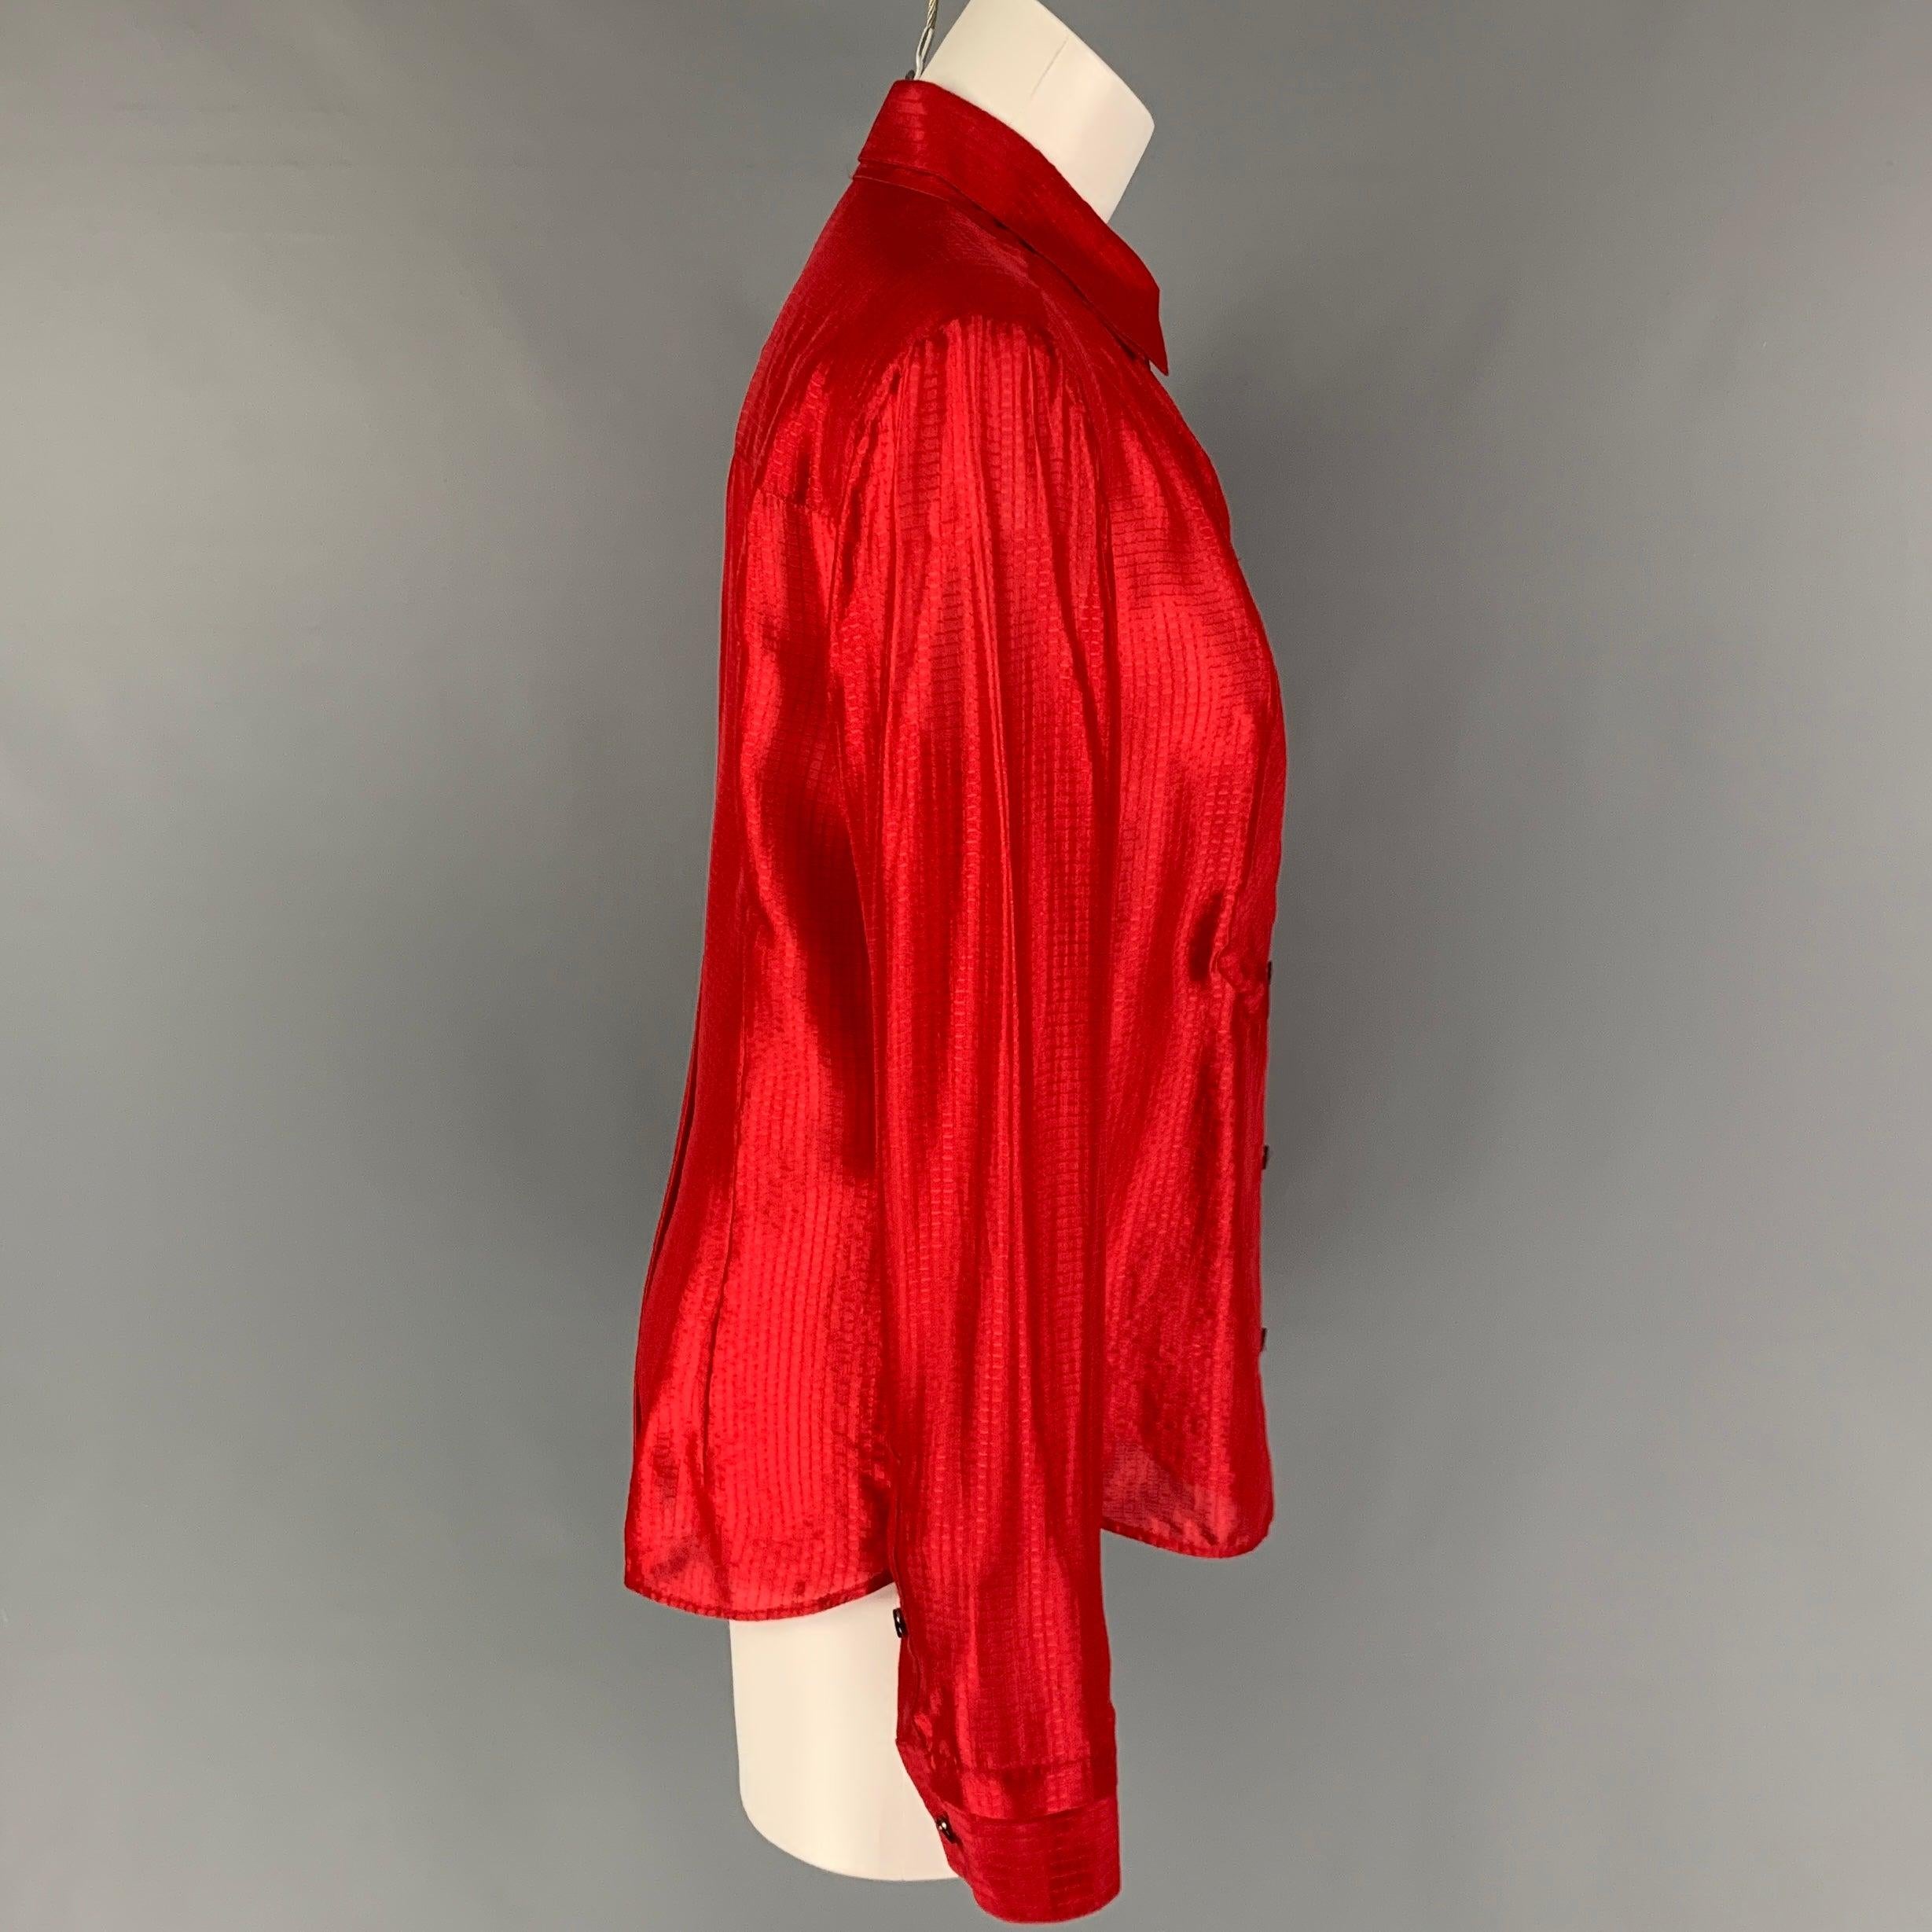 VIKTOR & ROLF shirt comes in a red textured silk featuring a double layer collar and a buttoned closure. Made in Italy.
New With Tags.
 

Marked:   46 

Measurements: 
 
Shoulder: 16.5 inches  Bust: 38 inches  Sleeve:
25 inches  Length: 26 inches 
 